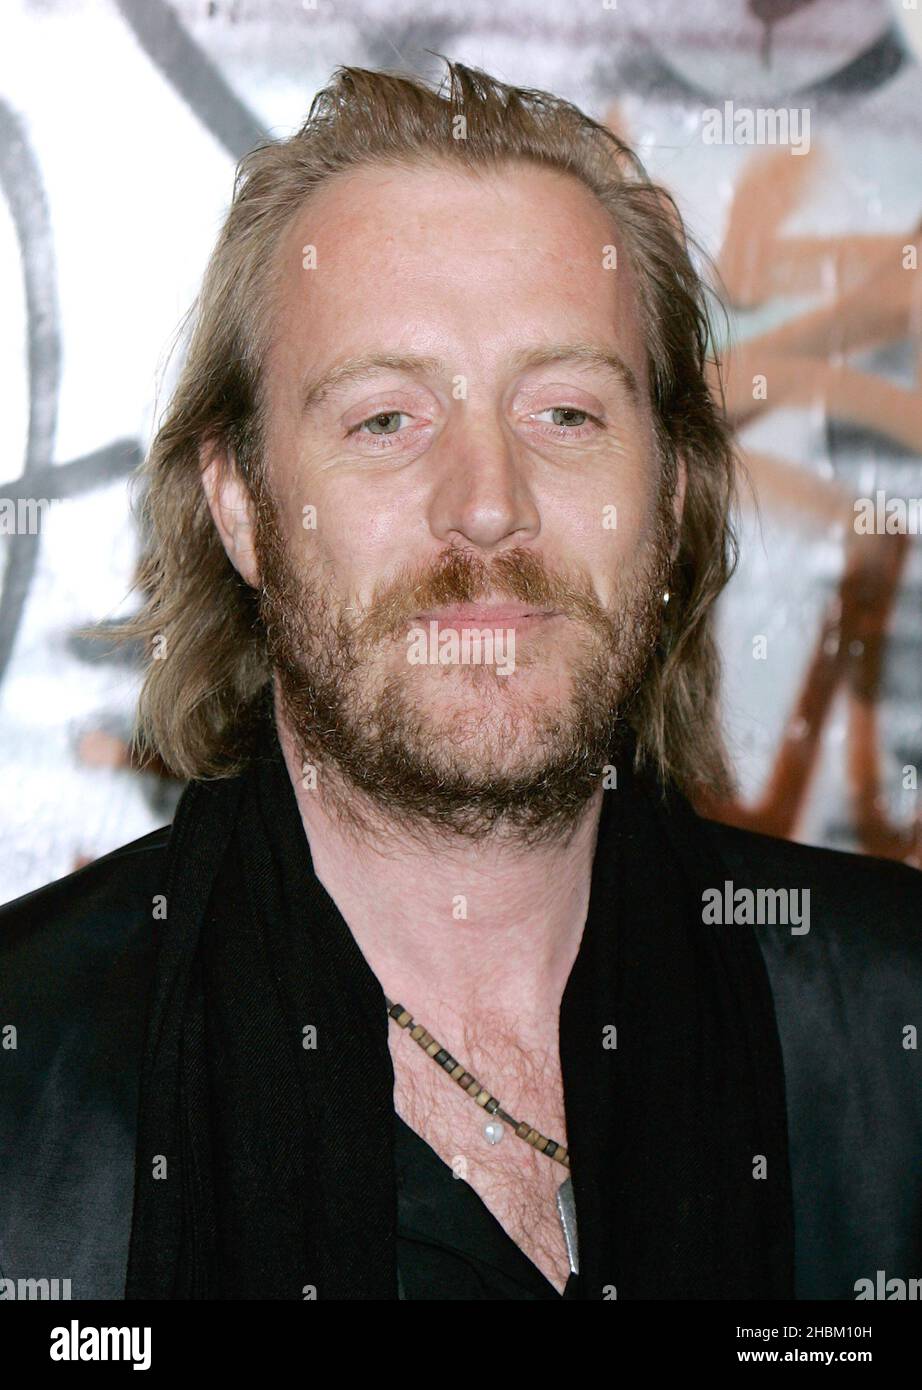 Rhys Ifans arriving for the UK Film Premiere of 'Banksy: Exit Through The Gift Shop', at Leake Street Tunnel in Waterloo, London Stock Photo